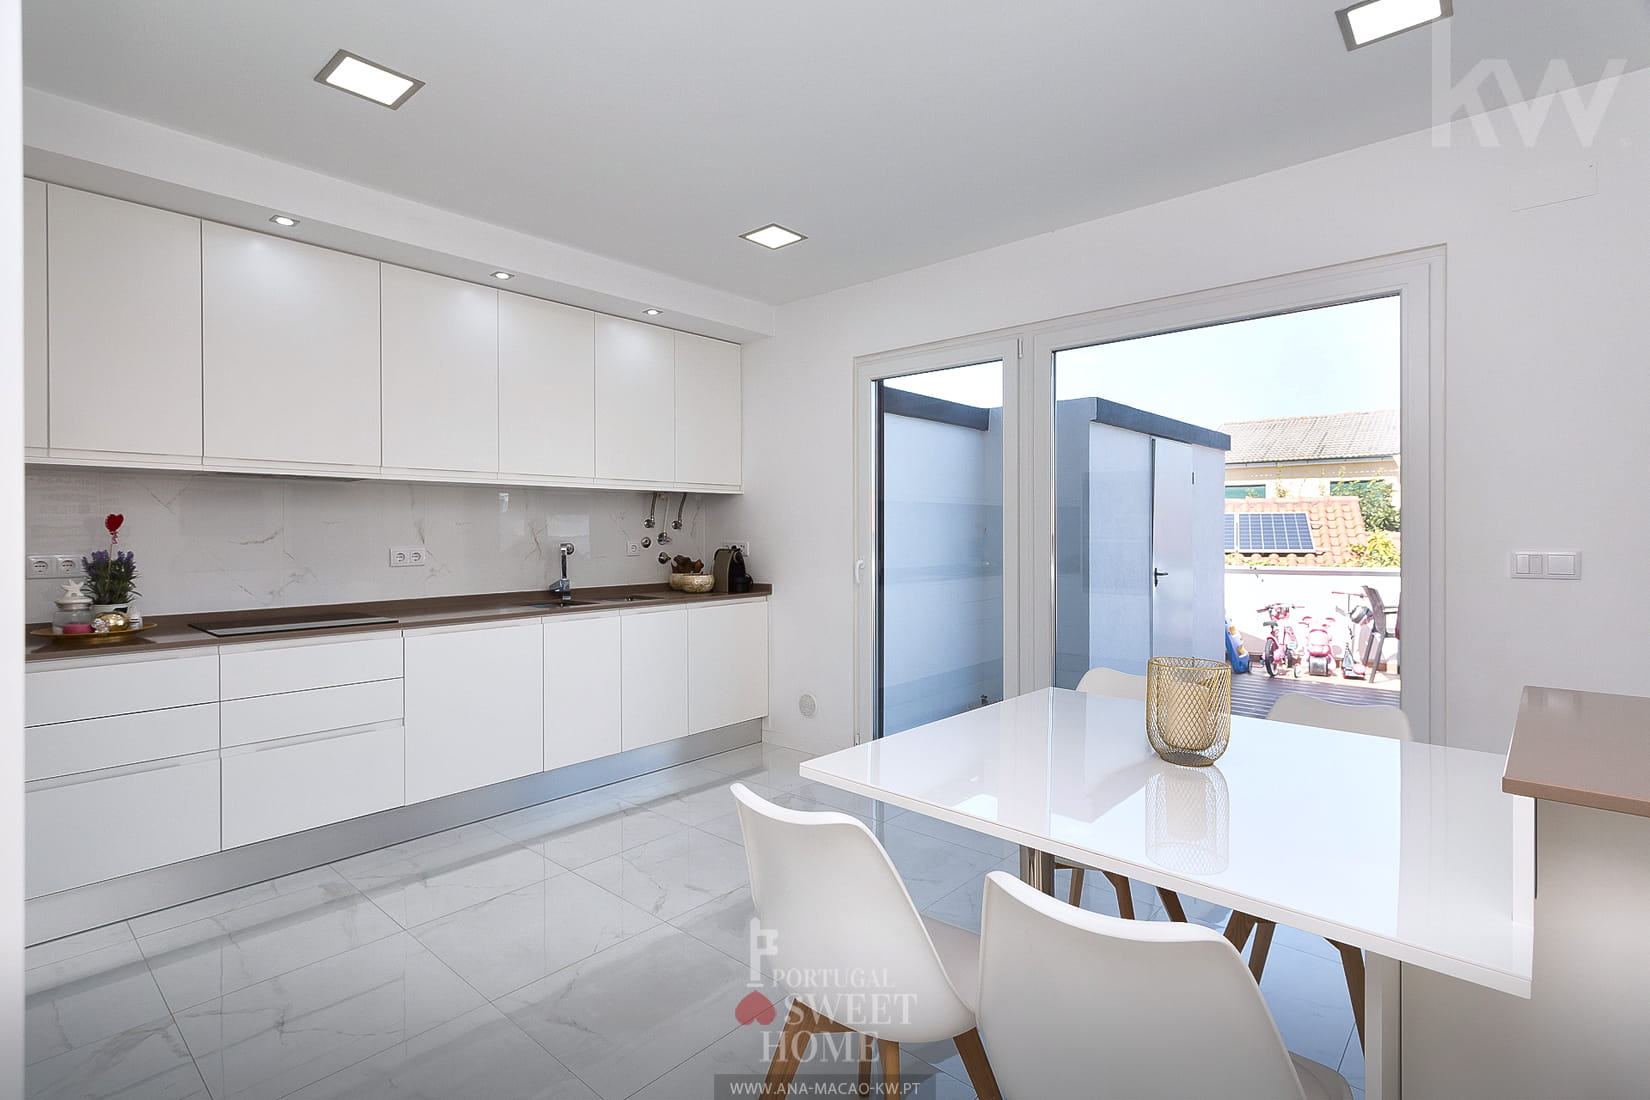 Large and bright kitchen view